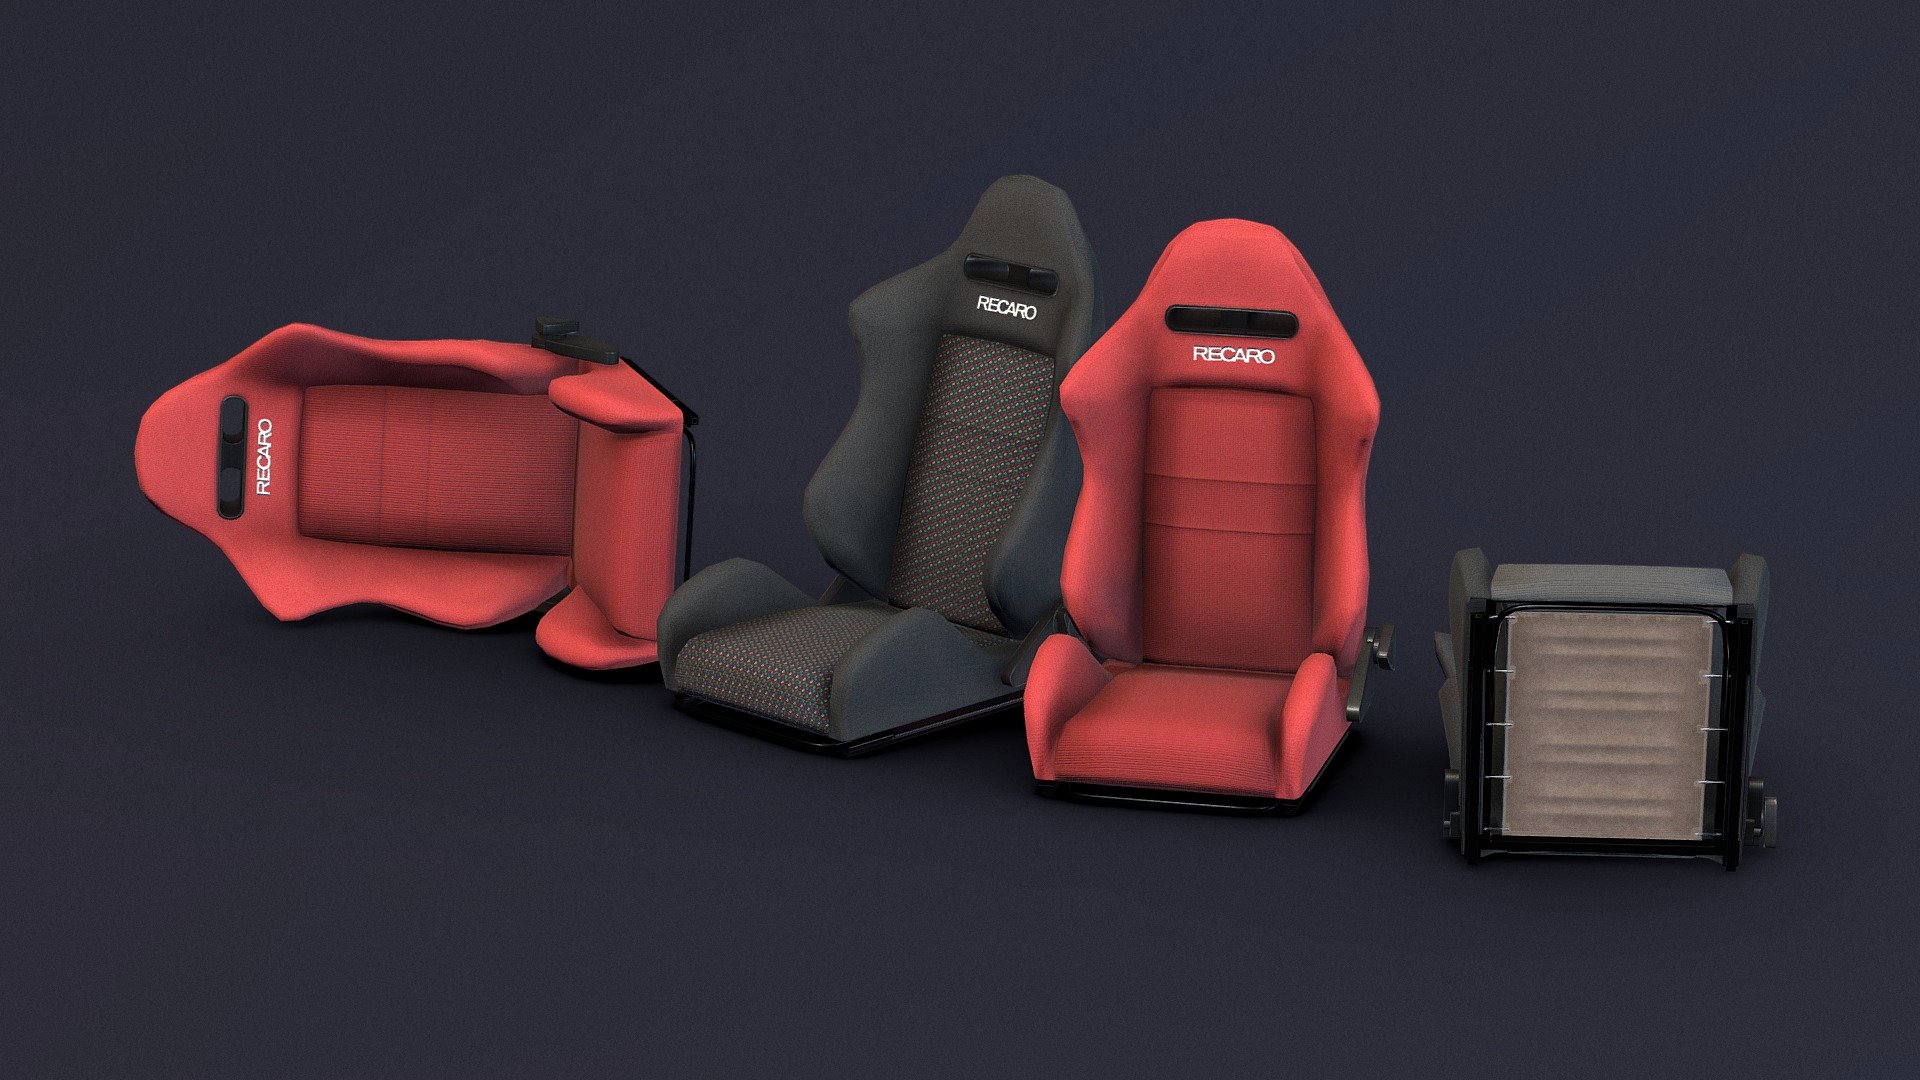 [UPLOADED ON 22/03/2021]
80's Recaro bucket seats.

Modelled in Autodesk 3DS MAX.

UV unwrapped in Autodesk Maya.

Textured in Substance Painter 3d model